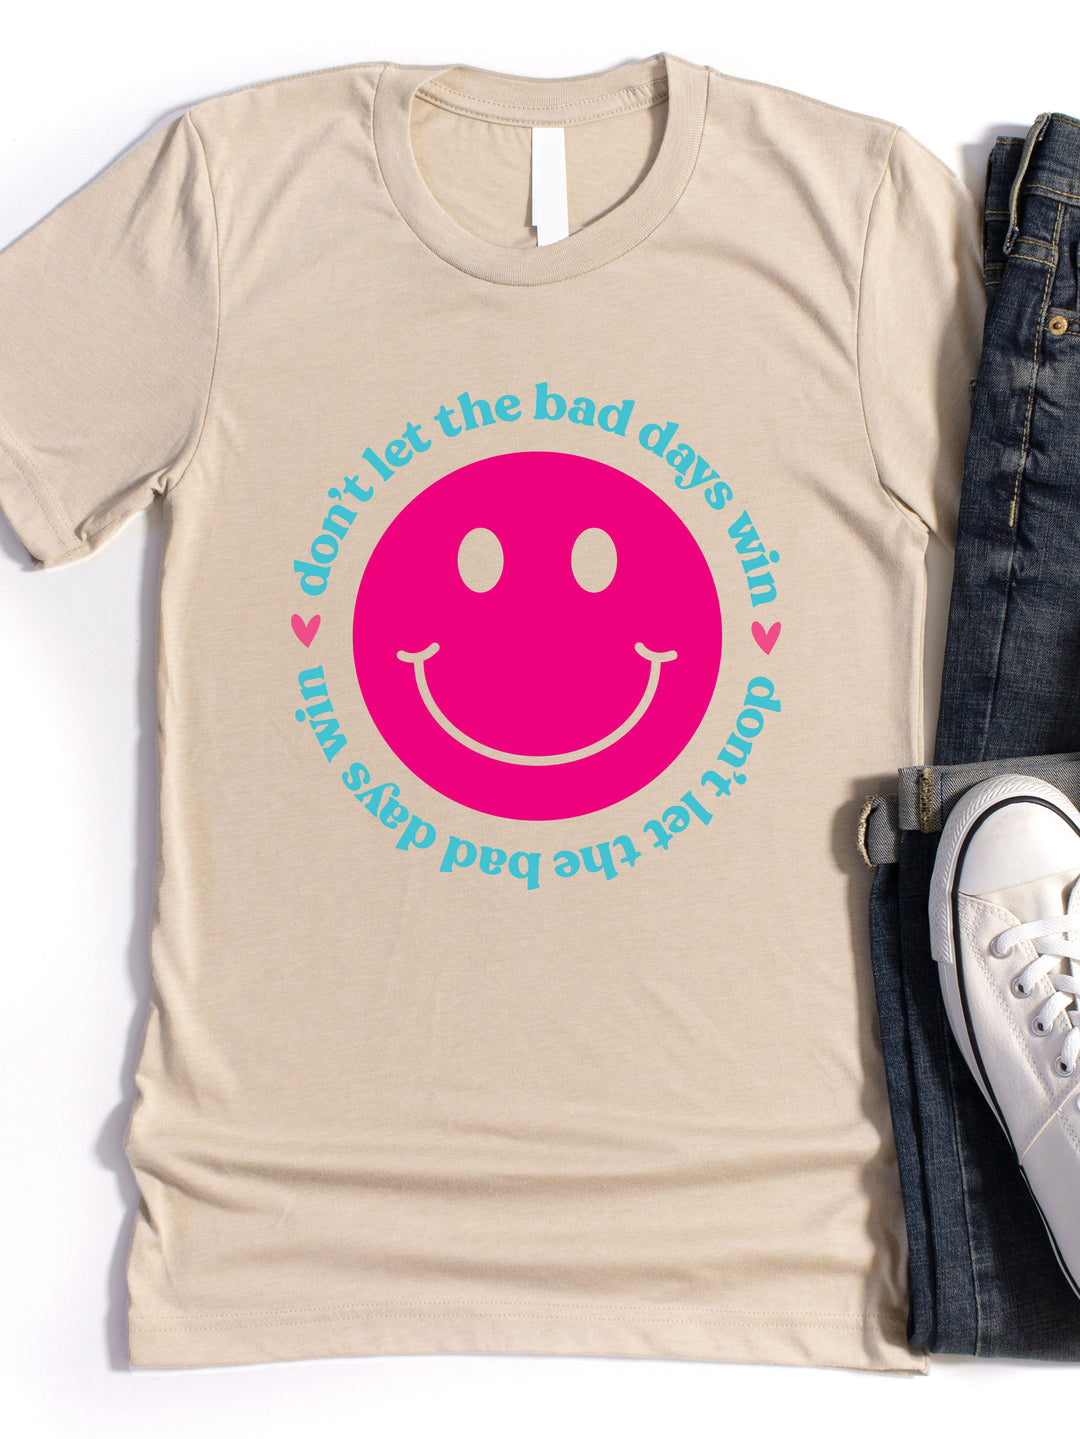 Don't let the bad days win Graphic Tee